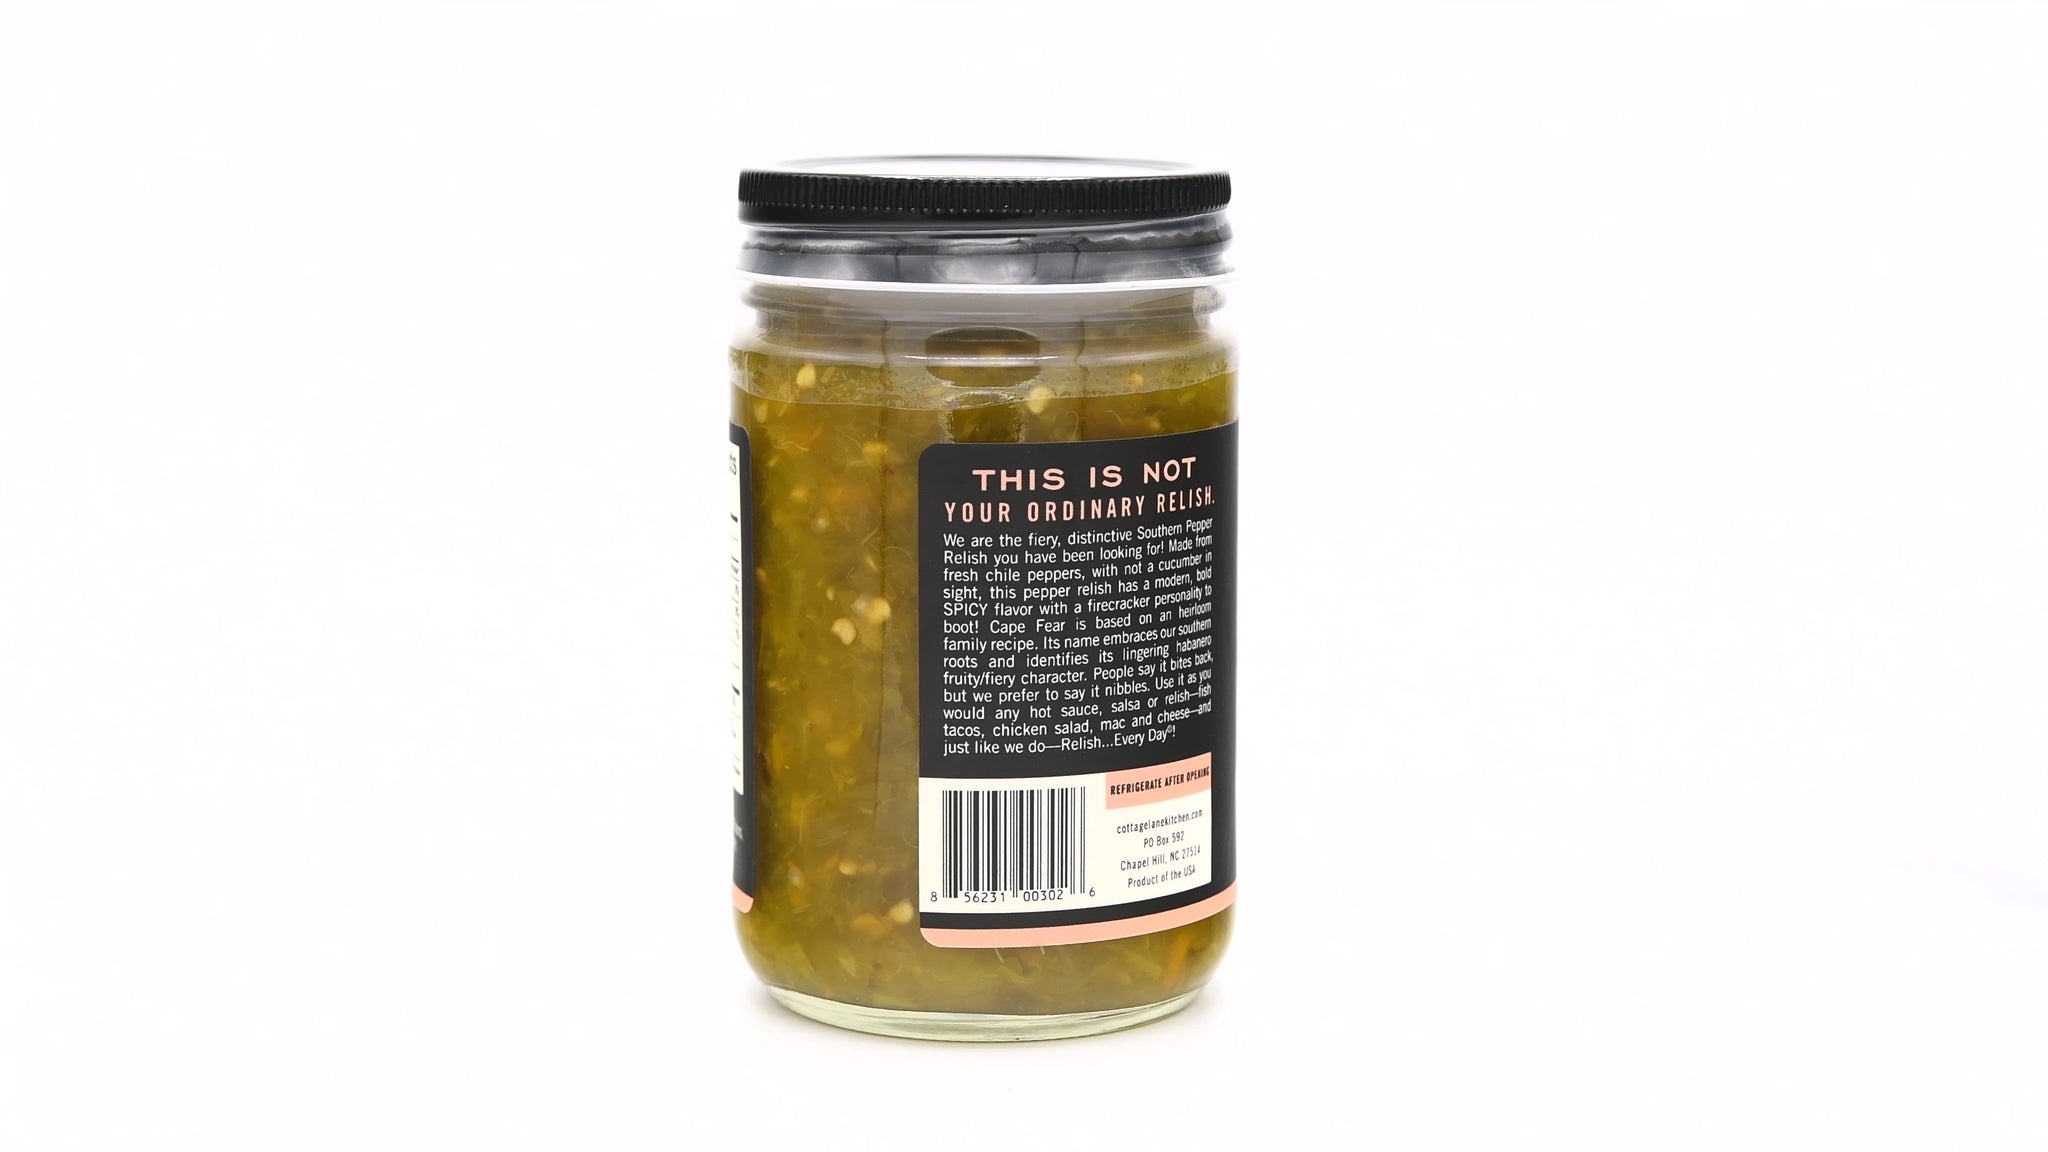 movie of Cape Fear Spicy pepper Relish bottle